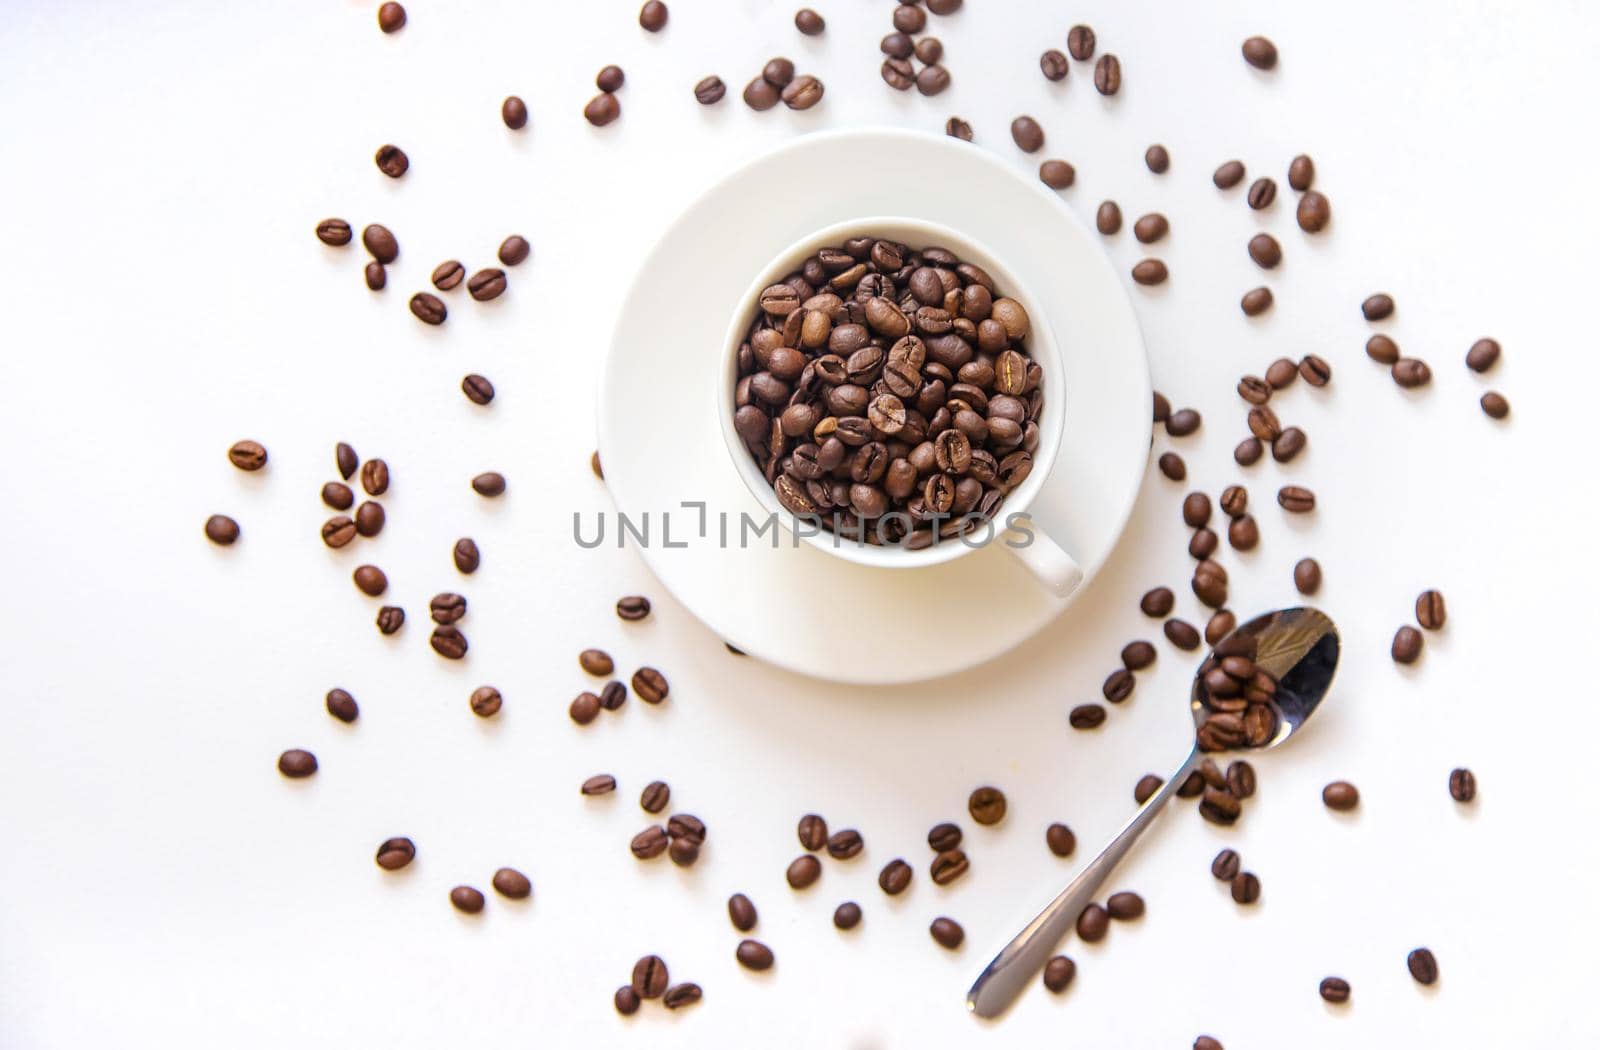 white cup and coffee beans on a white background. Selective focus.